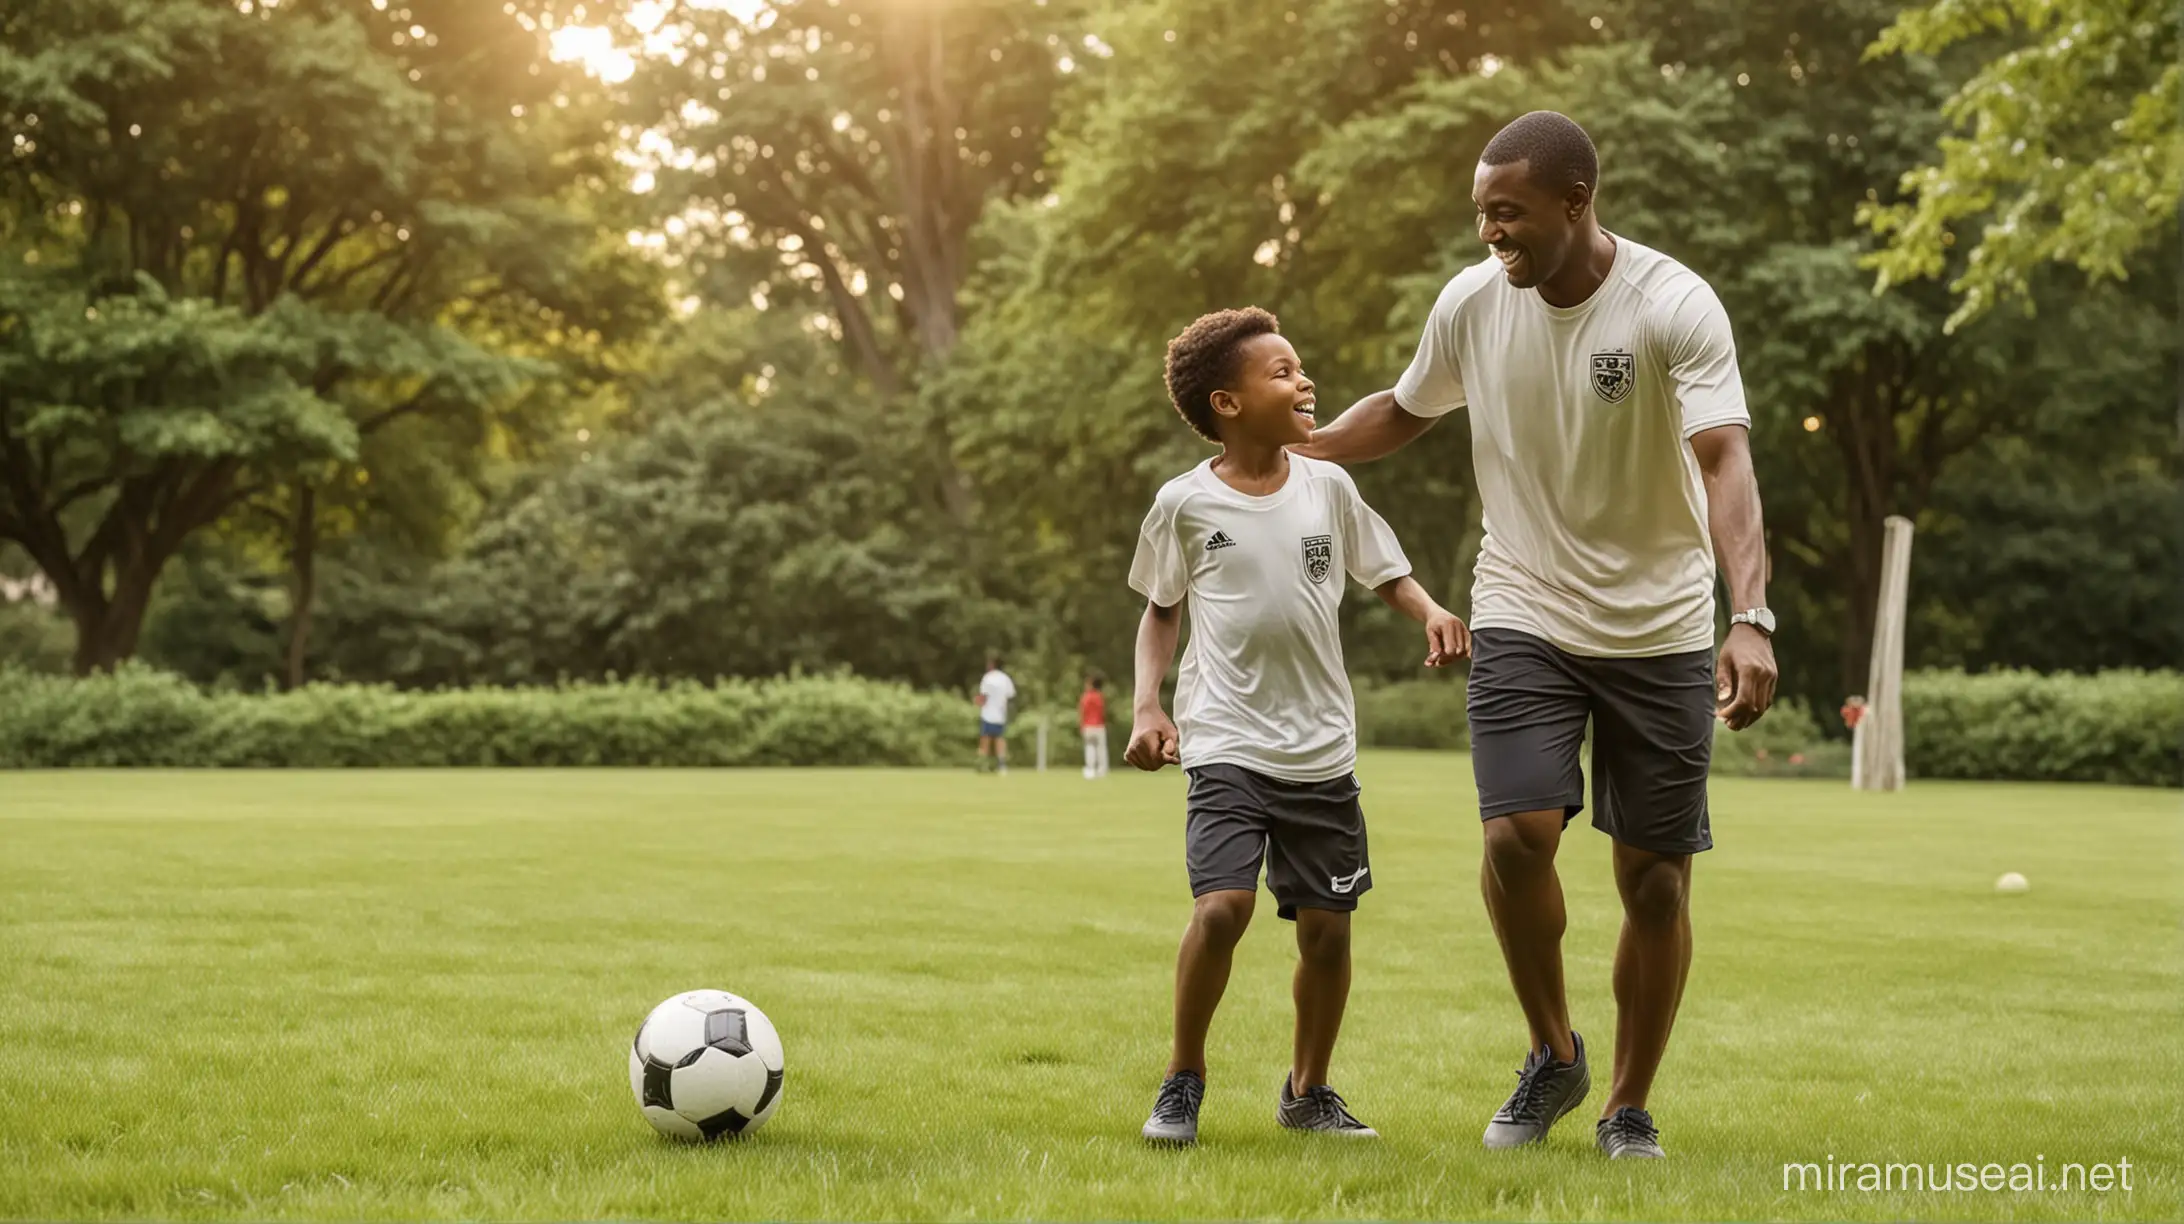 In a sunlit park, the air alive with the sounds of laughter and excitement, an African American man and his young son bond over the beautiful game of soccer. Dressed in matching jerseys, they kick the ball back and forth with skill and enthusiasm, their faces illuminated by wide smiles of joy and connection.

The man's movements are fluid and effortless, his experience evident in the way he effortlessly maneuvers the ball, while his son eagerly follows his lead, his eyes shining with admiration and delight. Together, they create a symphony of movement and teamwork, passing the ball with precision and grace.

Surrounded by the lush greenery of the park, they are lost in the moment, their bond strengthened with each playful exchange of the ball. As they chase after the soccer ball together, they share laughter and camaraderie, forging memories that will last a lifetime.

In this simple yet profound moment of father-son bonding, the African American man and his young son find joy and connection in the universal language of sport. Through the game of soccer, they celebrate the power of family, love, and shared experiences, creating a legacy of love and teamwork that will endure for generations to come.